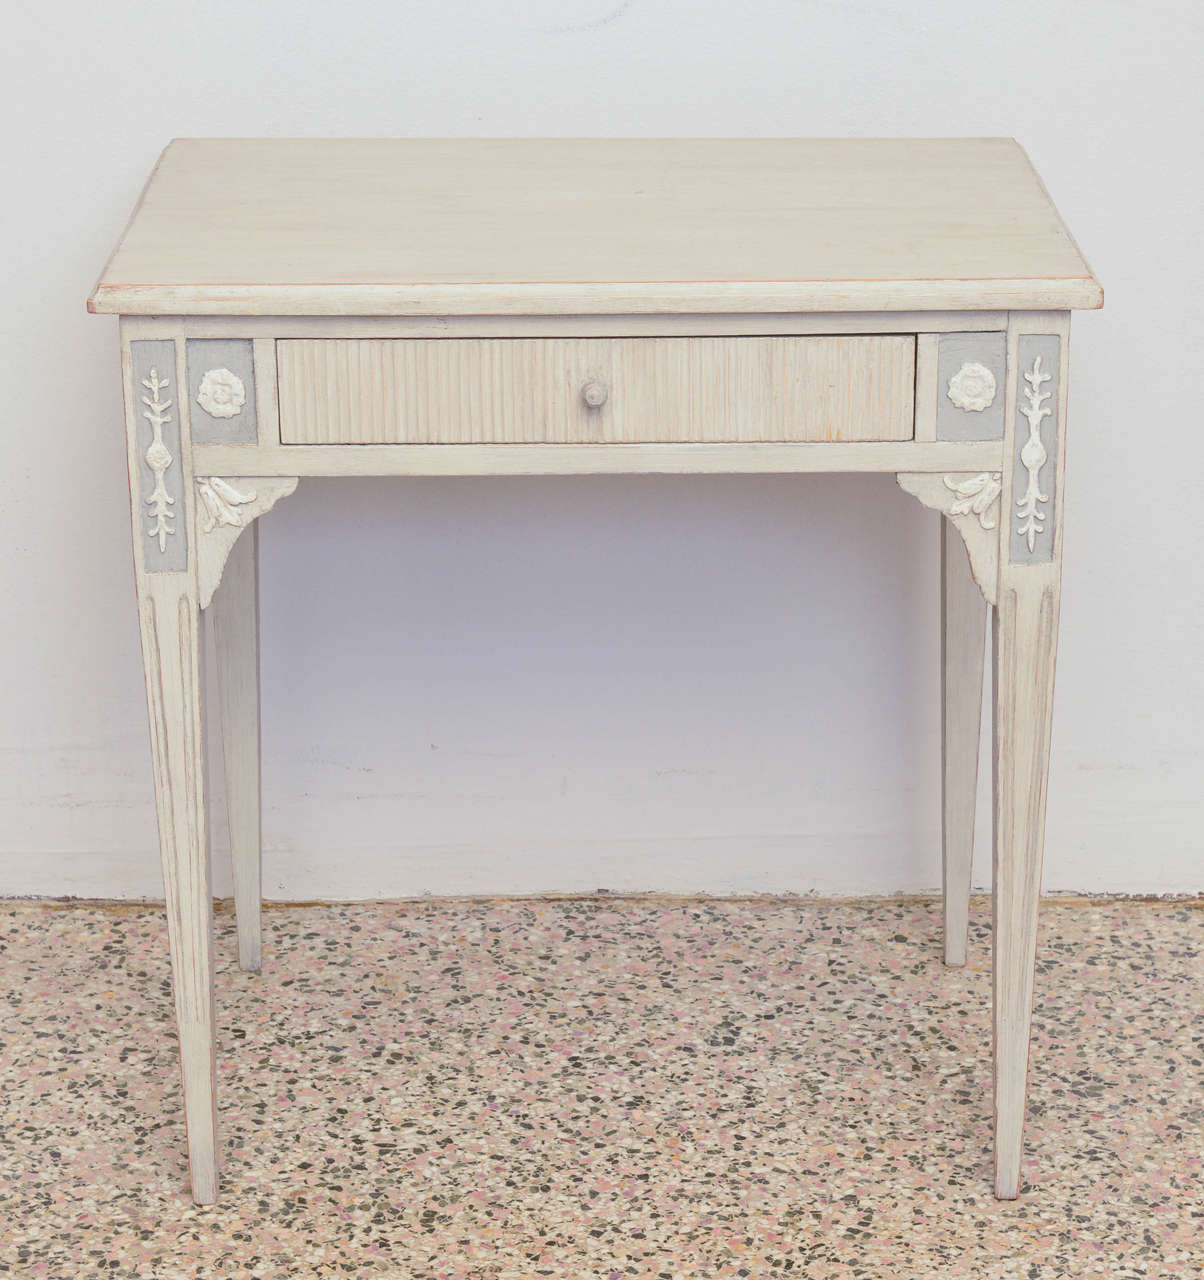 19th century antique Swedish Gustavian table in a greyish washed color with beautiful raised carvings; has center drawer with raised ribbed panel and original wood pull; carvings on either side of the drawer are raised like a cameo and are a floral